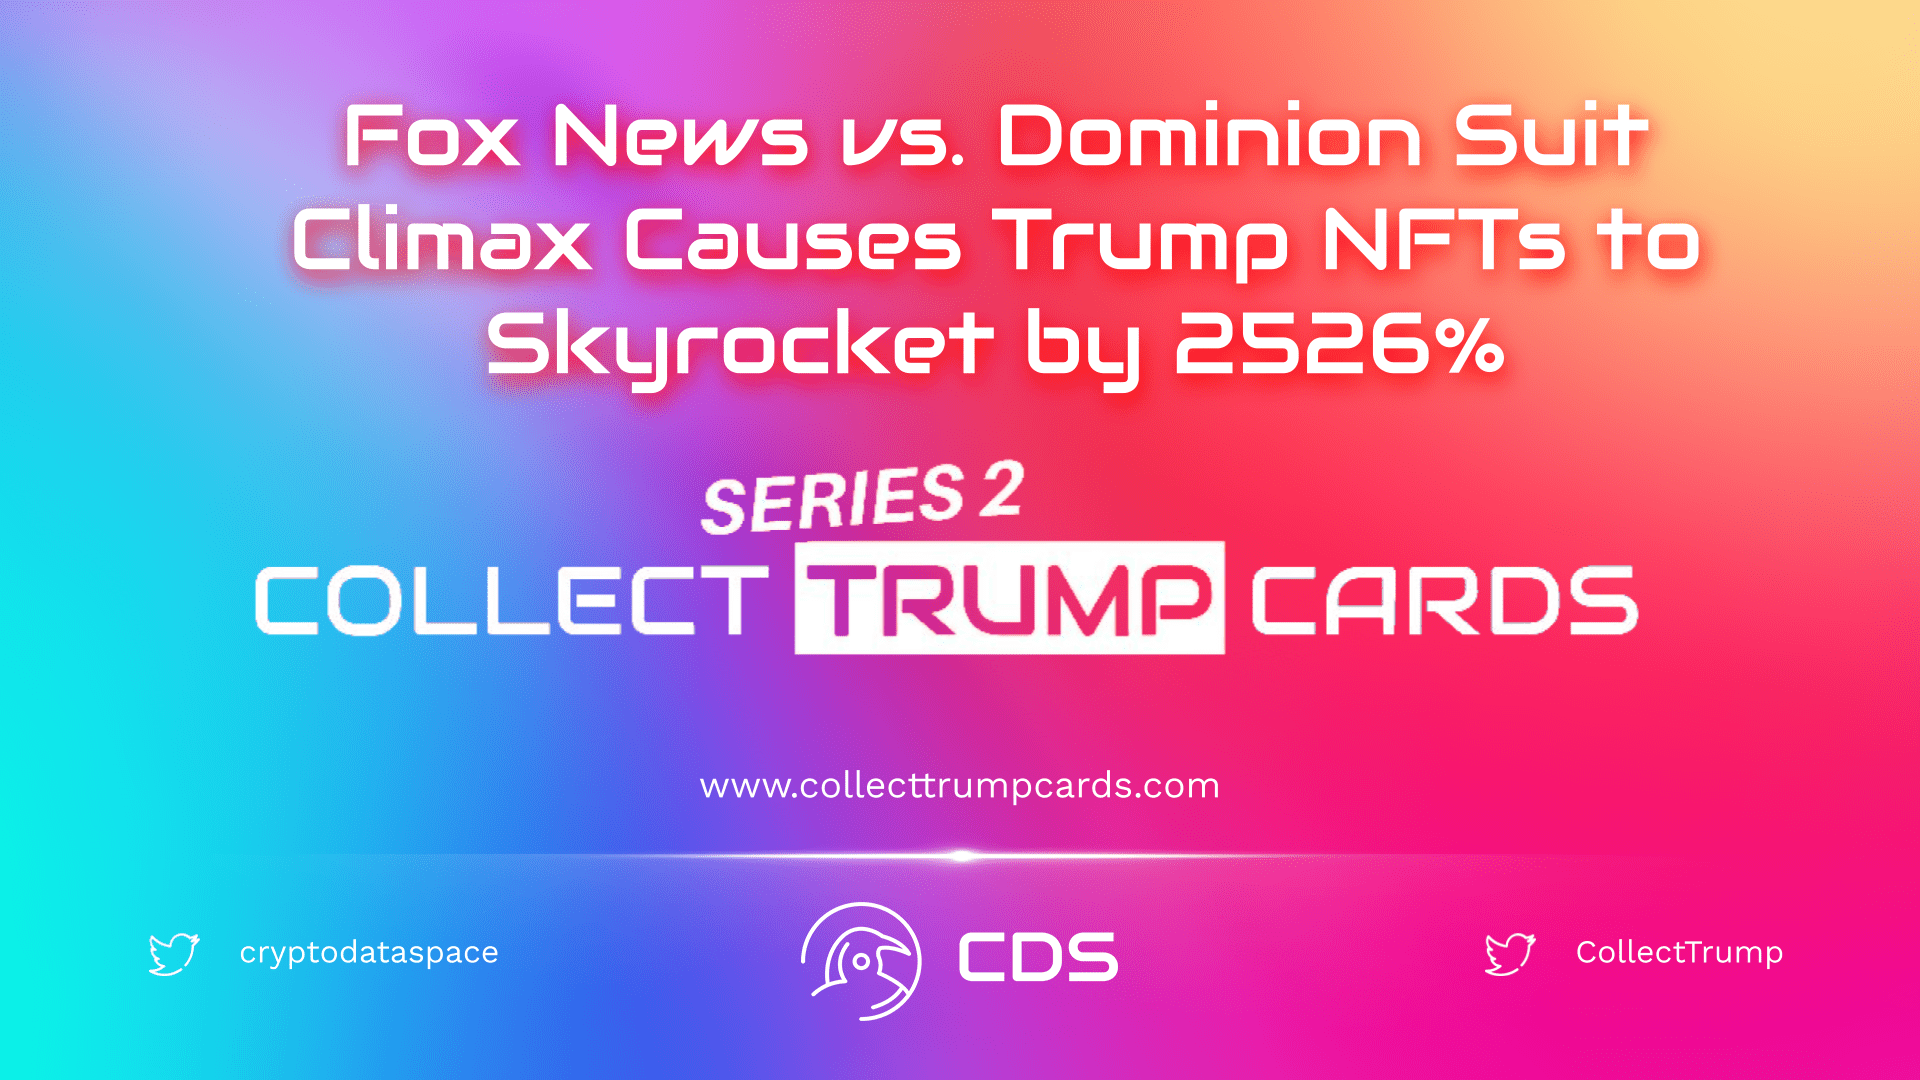 Fox News vs. Dominion Suit Climax Causes Trump NFTs to Skyrocket by 2526%